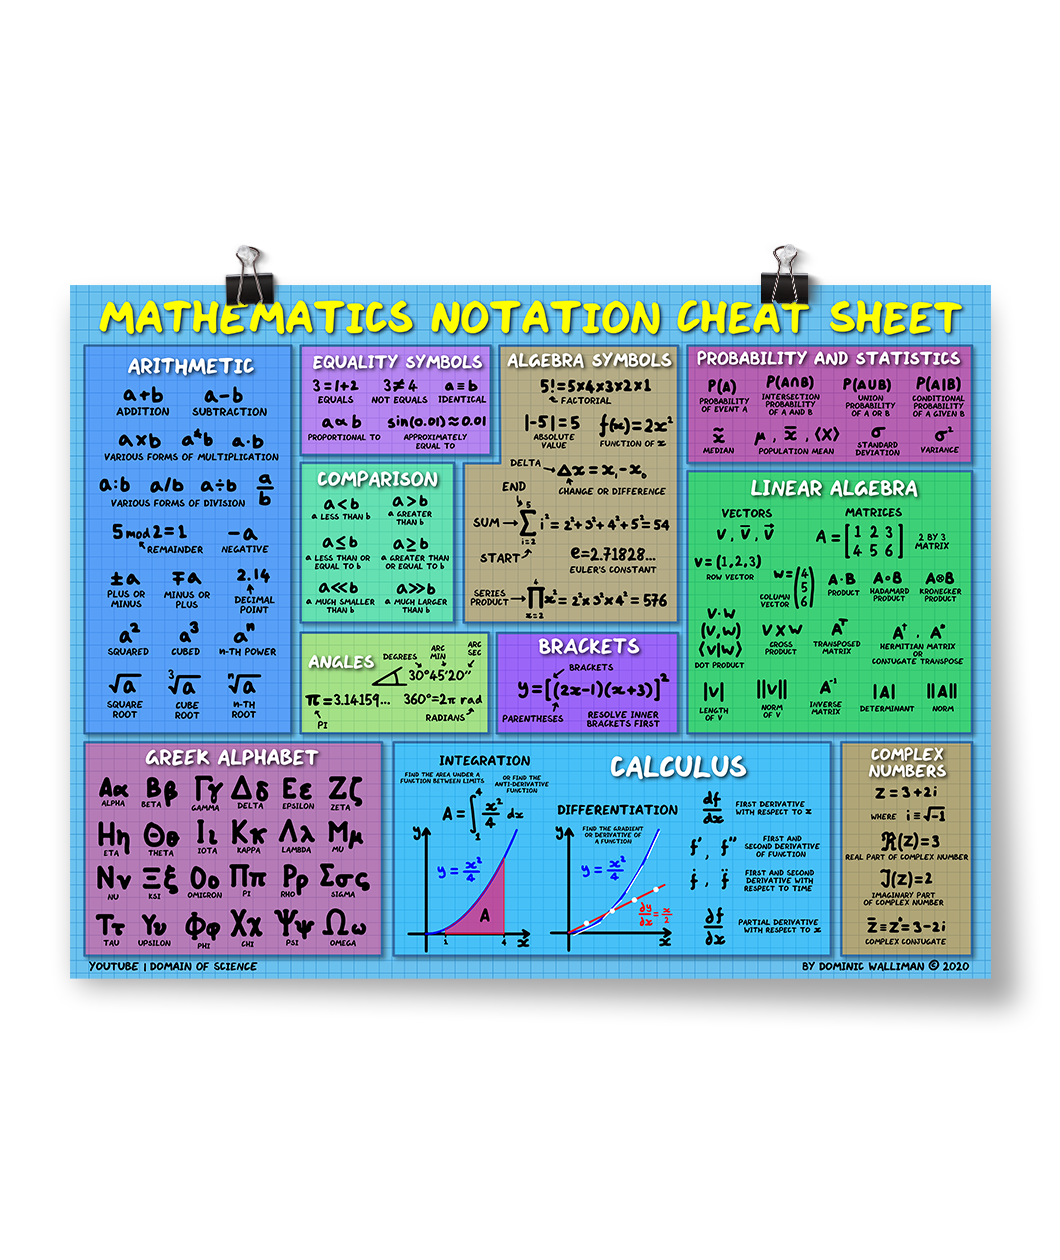 A blue poster with boxes of different colors filled with mathmatic equations - by Domain of Science